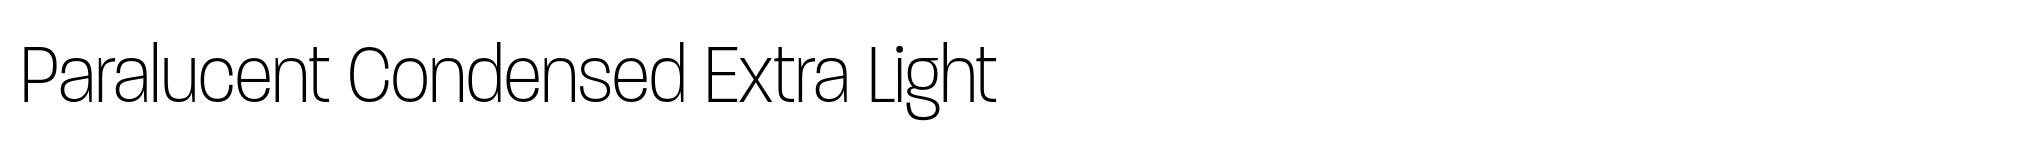 Paralucent Condensed Extra Light image